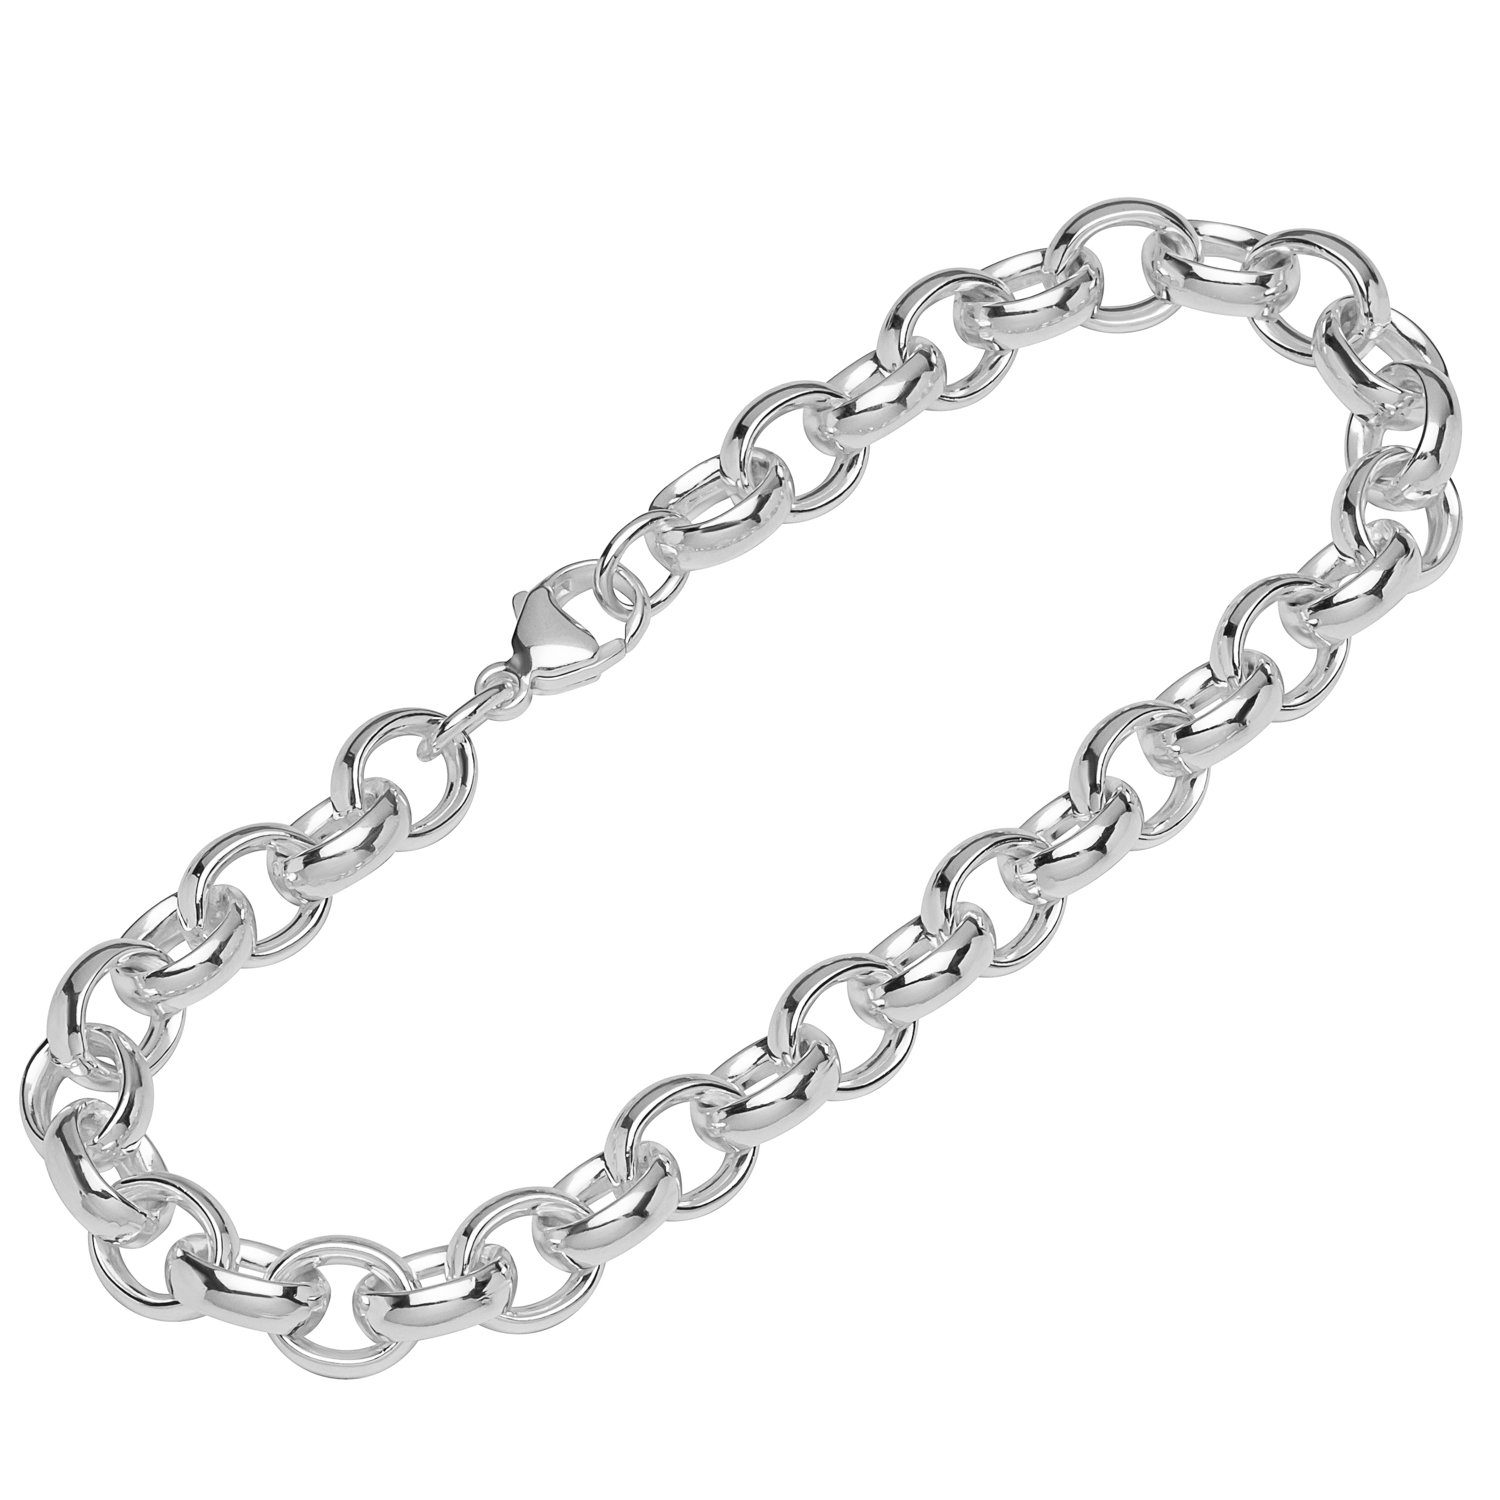 NKlaus Silberarmband Armband 925 Sterling Silber 24cm Erbskette oval He (1 Stück), Made in Germany